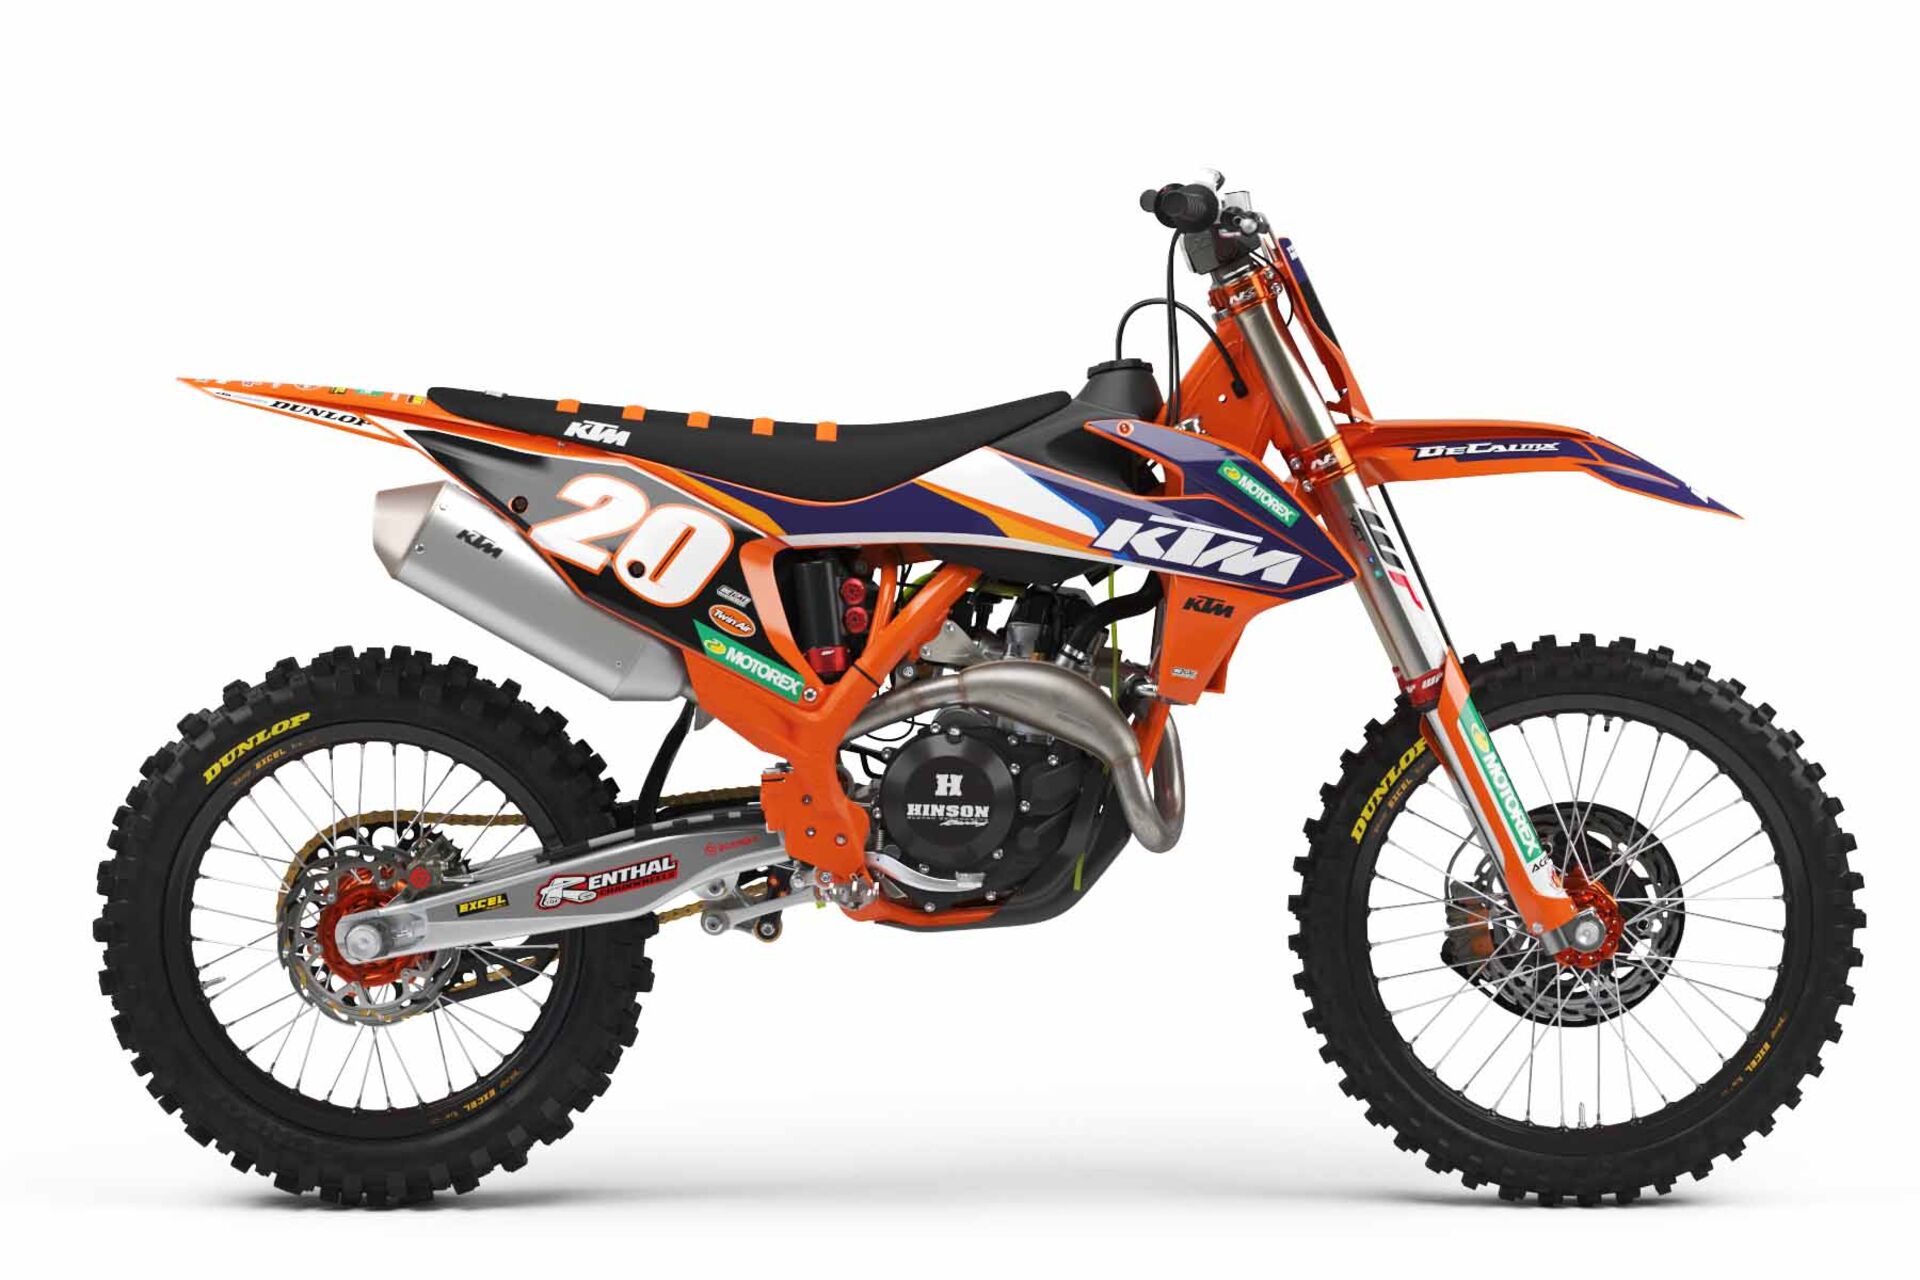 Number Plate Graphics Kit with Airbox KTM SXF450 2019 KTM Factory Series 20